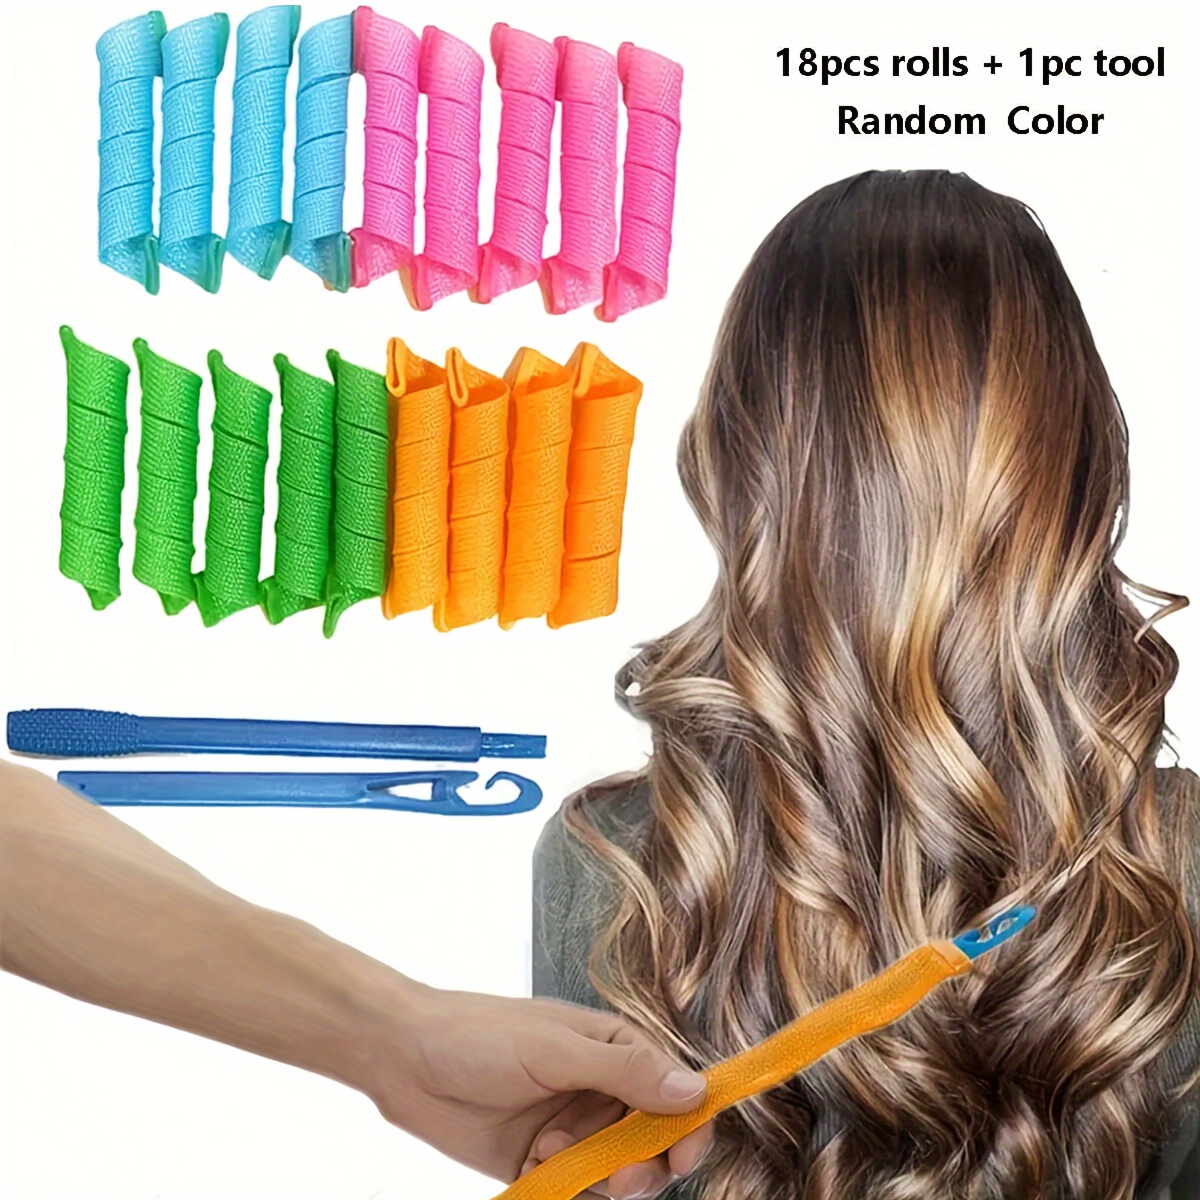 

Magic Hair Curlers Set, 18 Count Spiral Rollers With Styling Hook Tool, Easy To Use, No Heat Damage, Flexible Hair Curling Rods For Normal Hair Types - Diy Wavy Hairstyle Tools